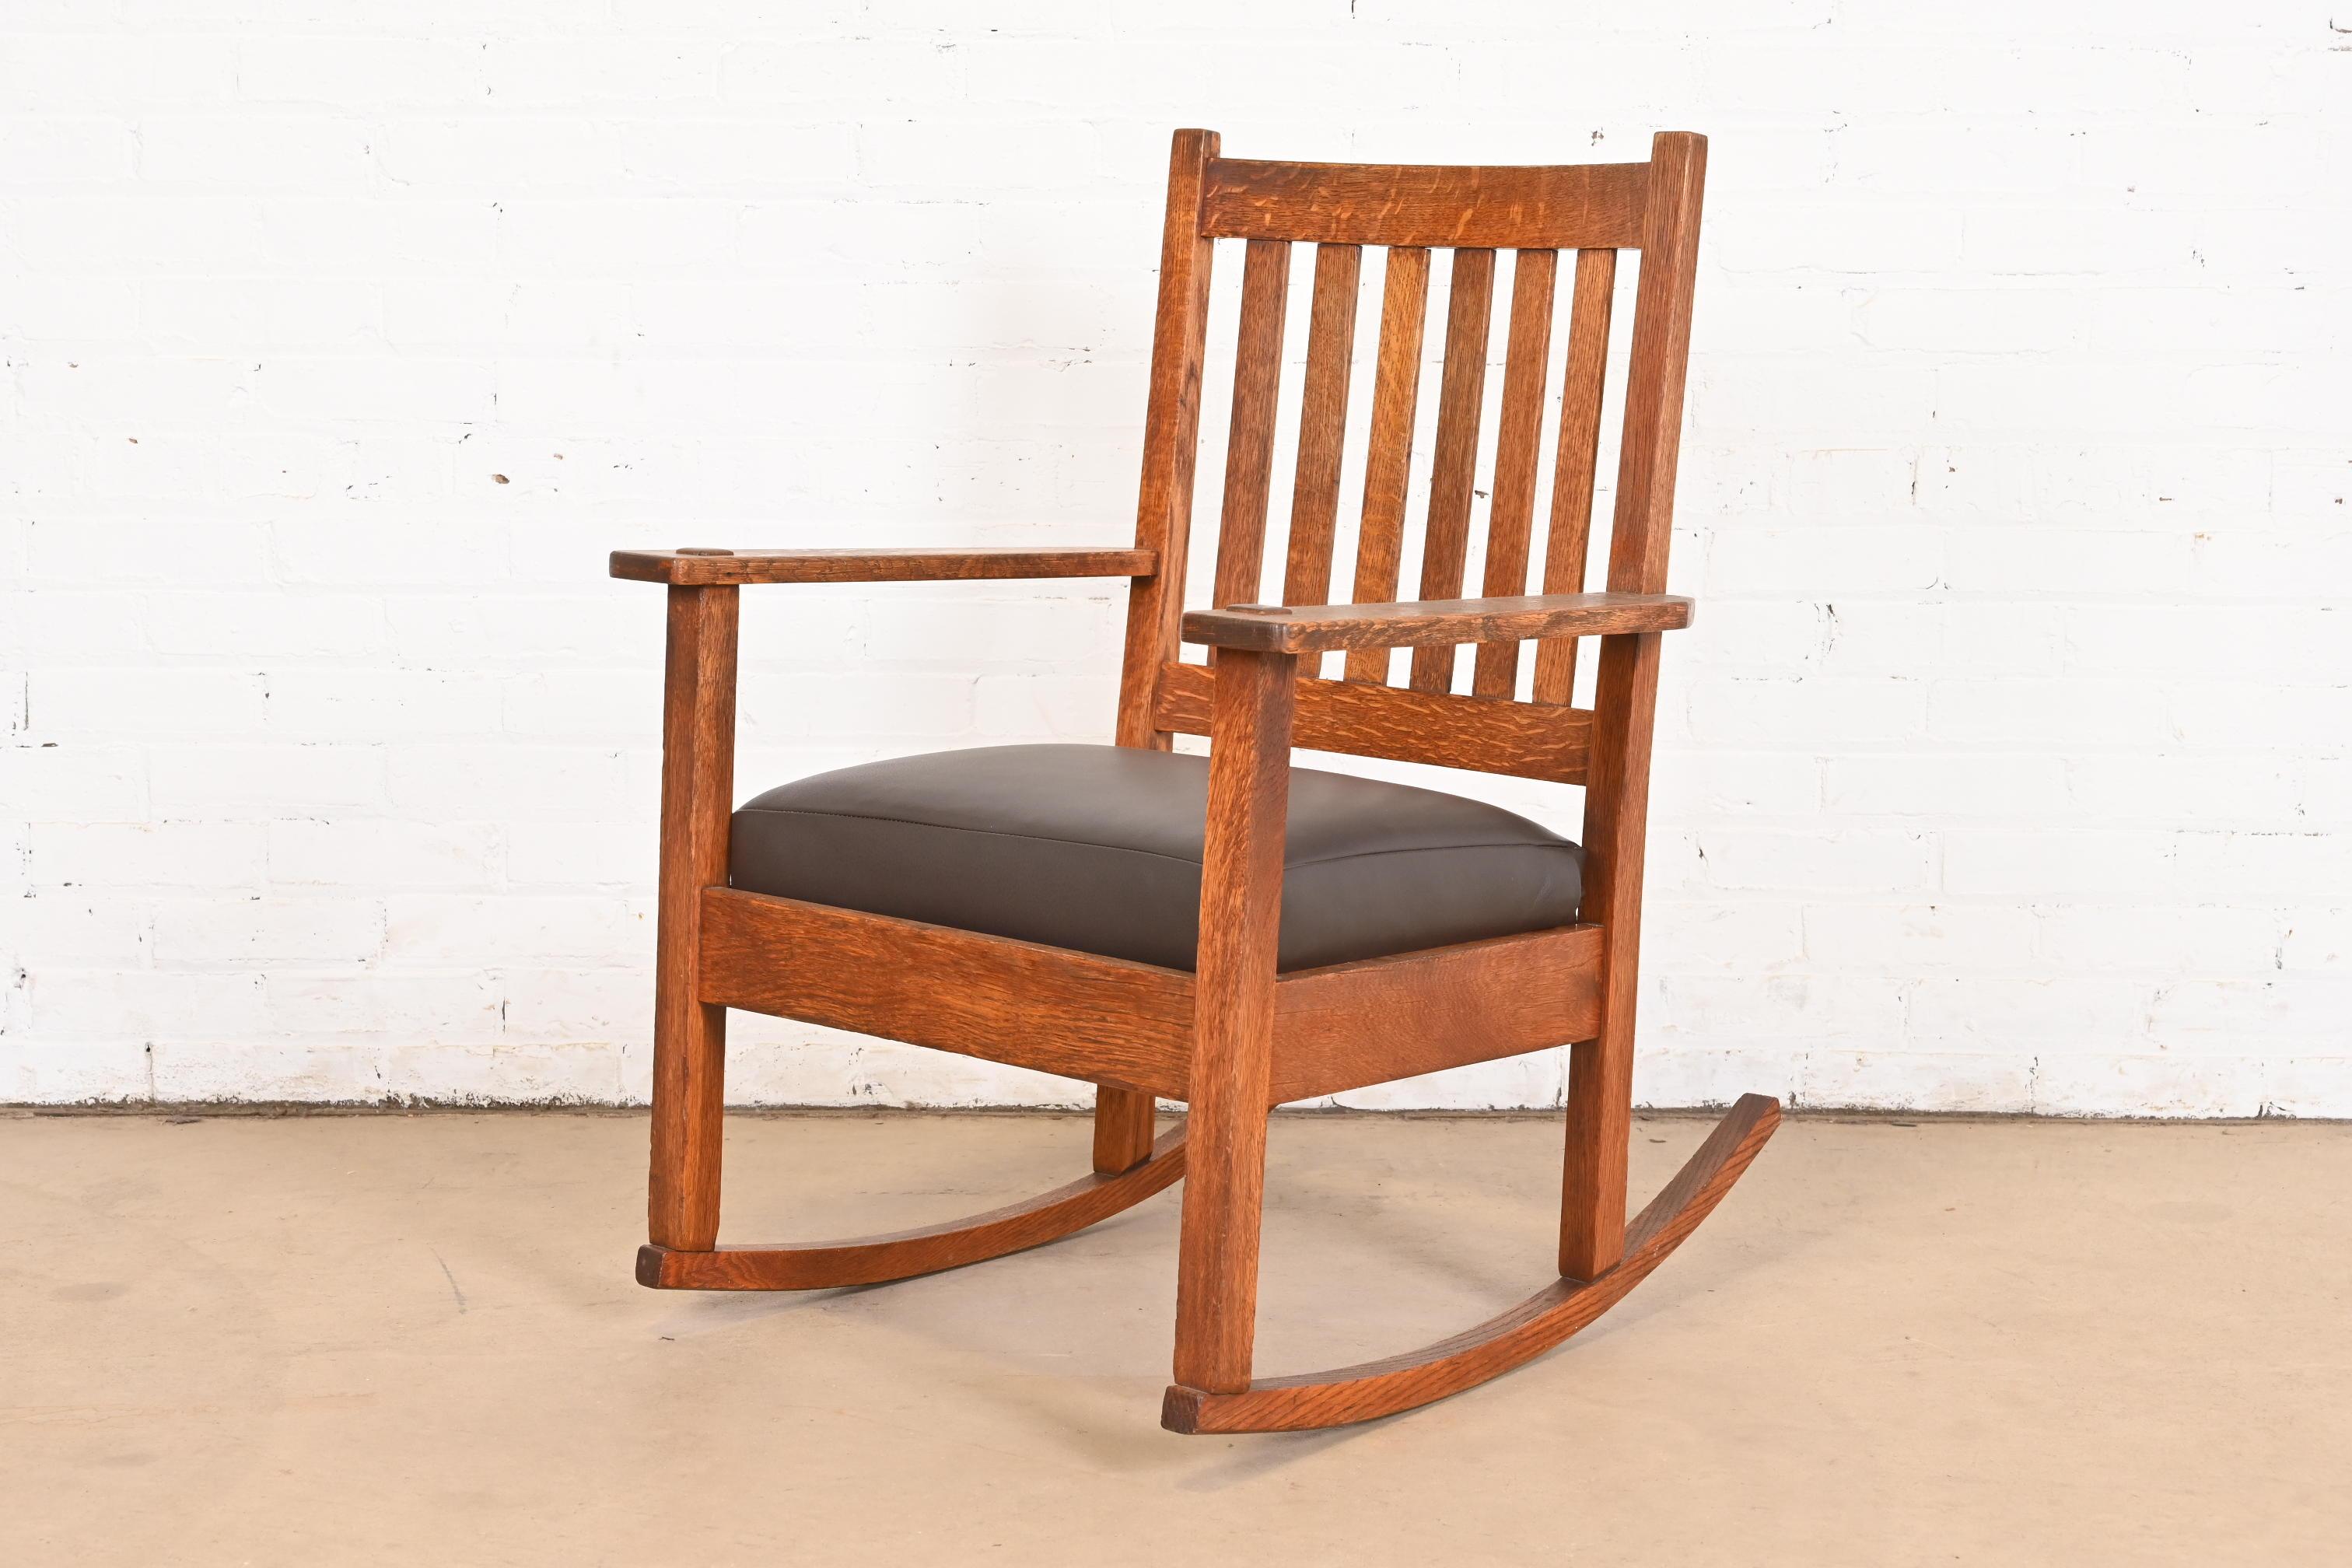 A gorgeous Mission or Arts & Crafts rocker

By Stickley Brothers

USA, Circa 1900

Solid quarter sawn oak, with newly reupholstered brown leather seat cushion.

Measures: 25.5